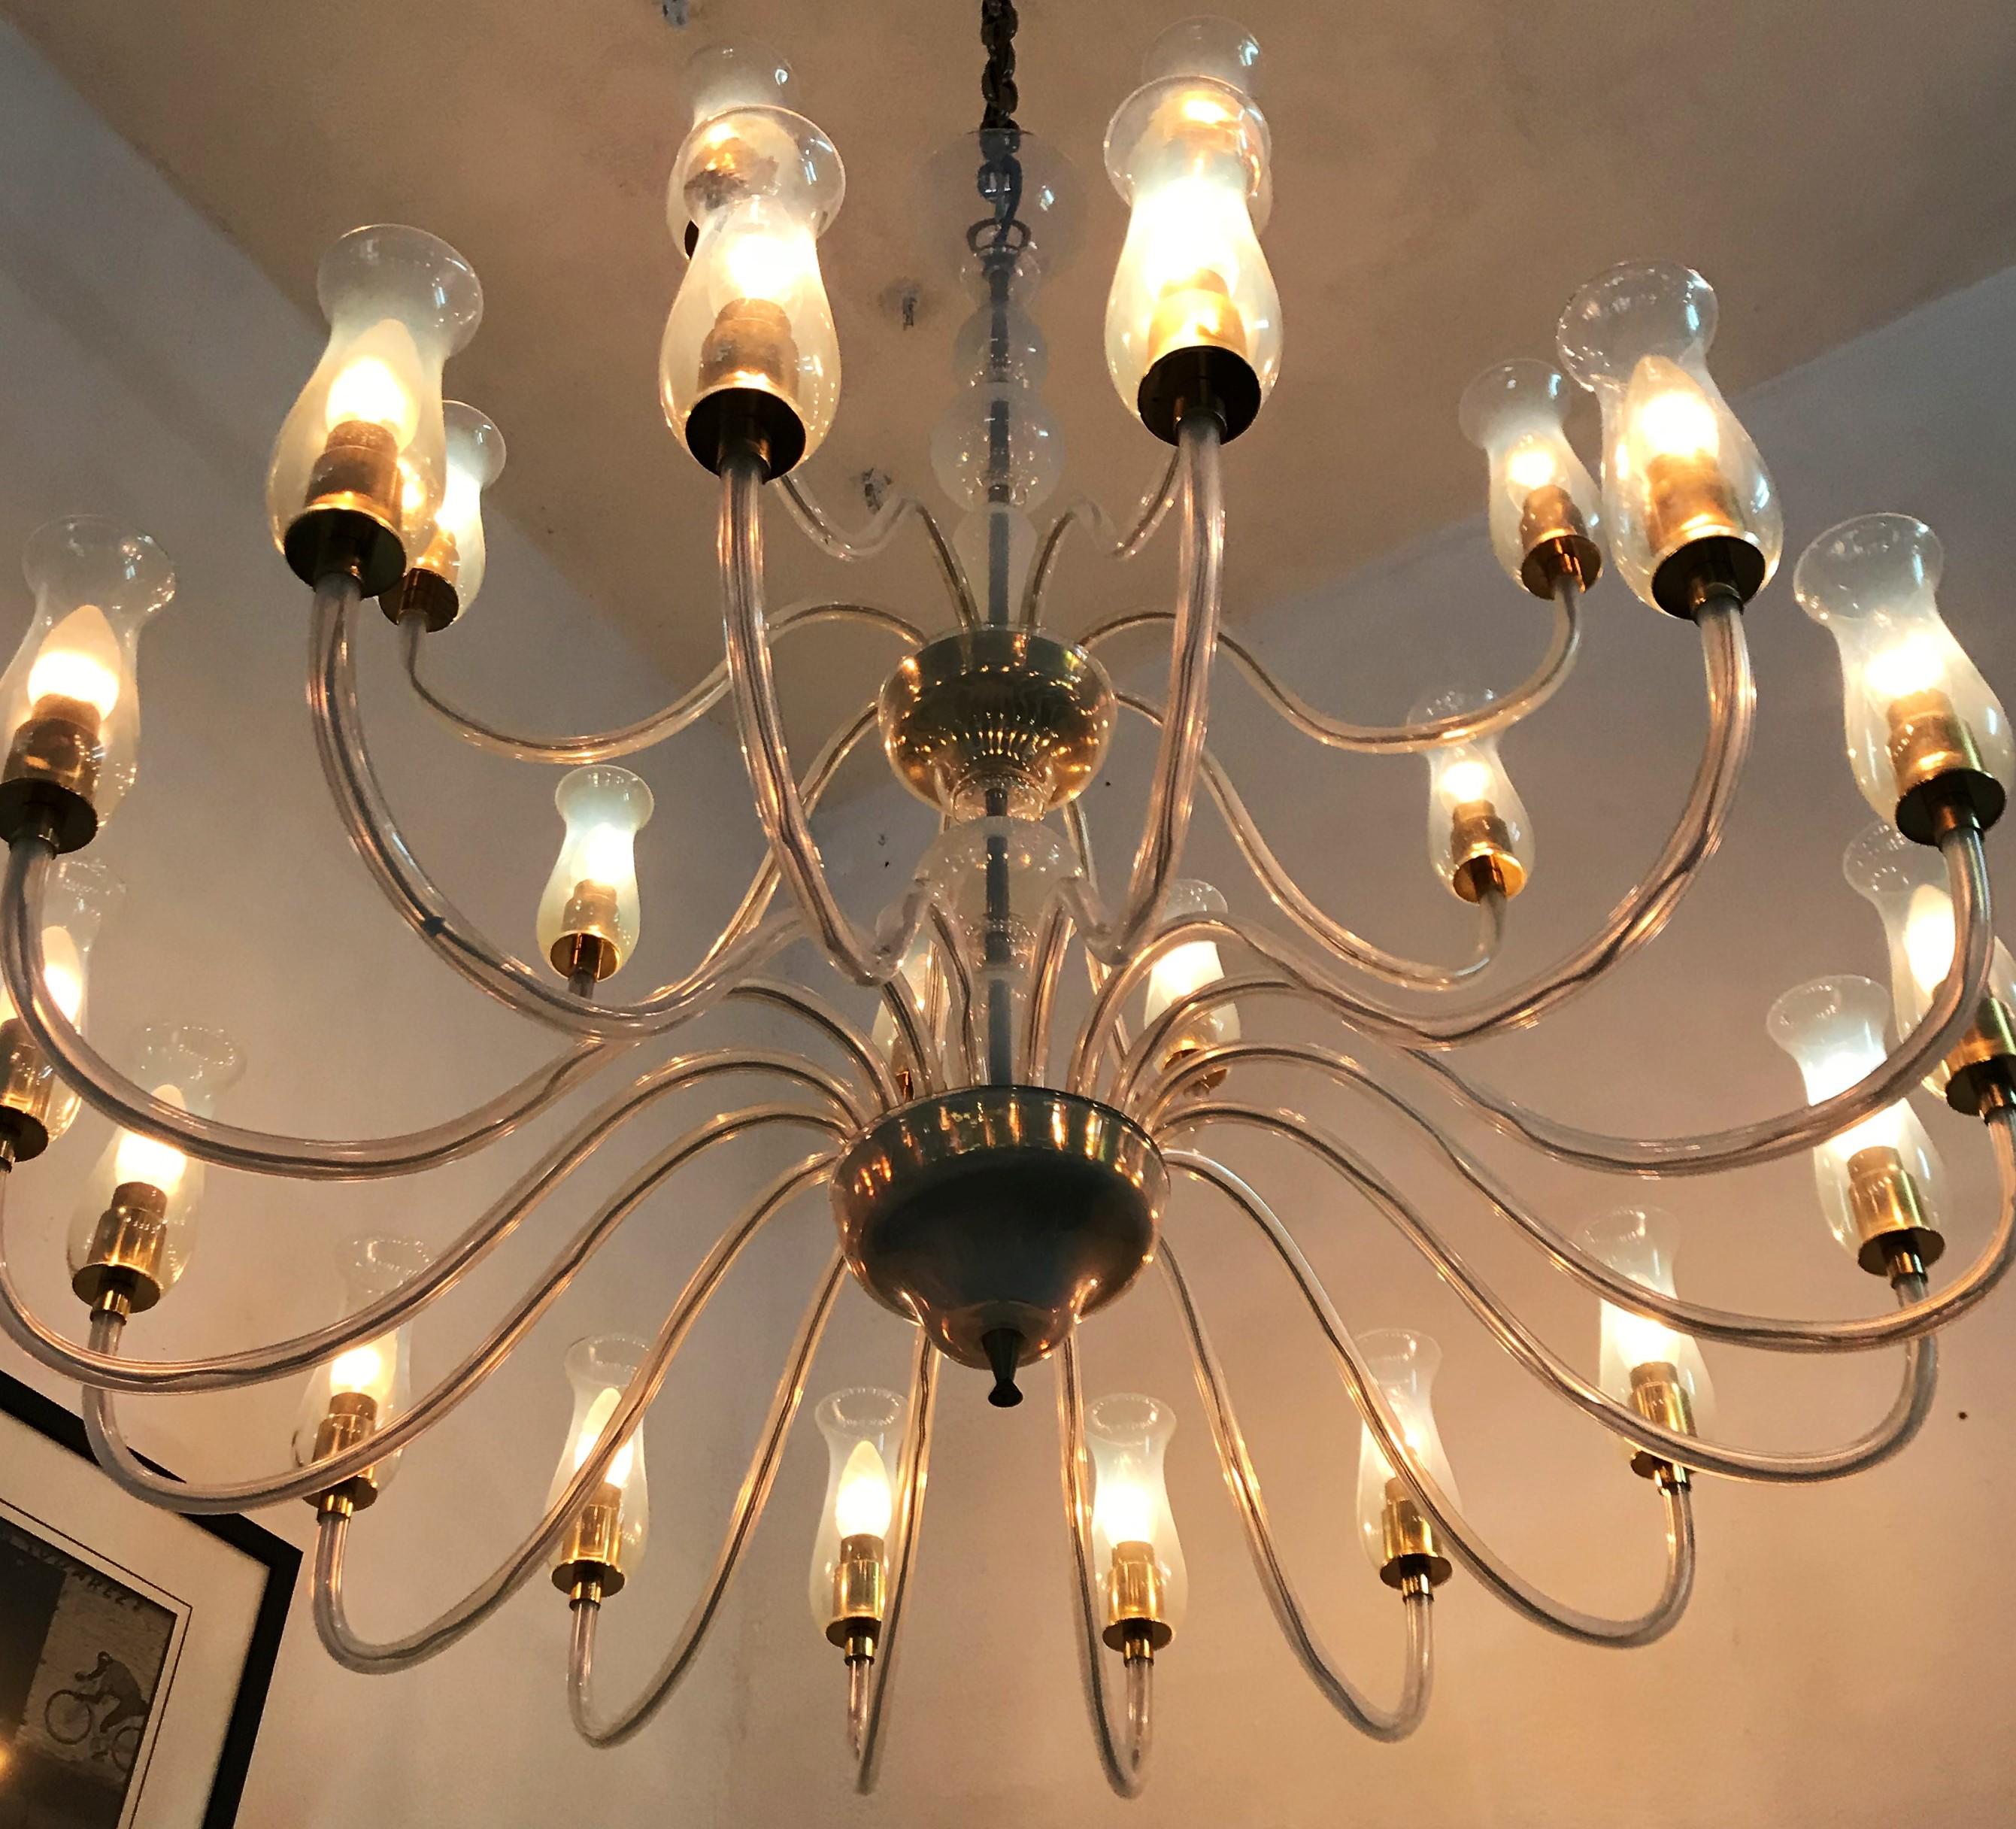 24-Light Mid Century Modern Chandelier by Cenedese in Murano Glass, circa 1970 For Sale 5